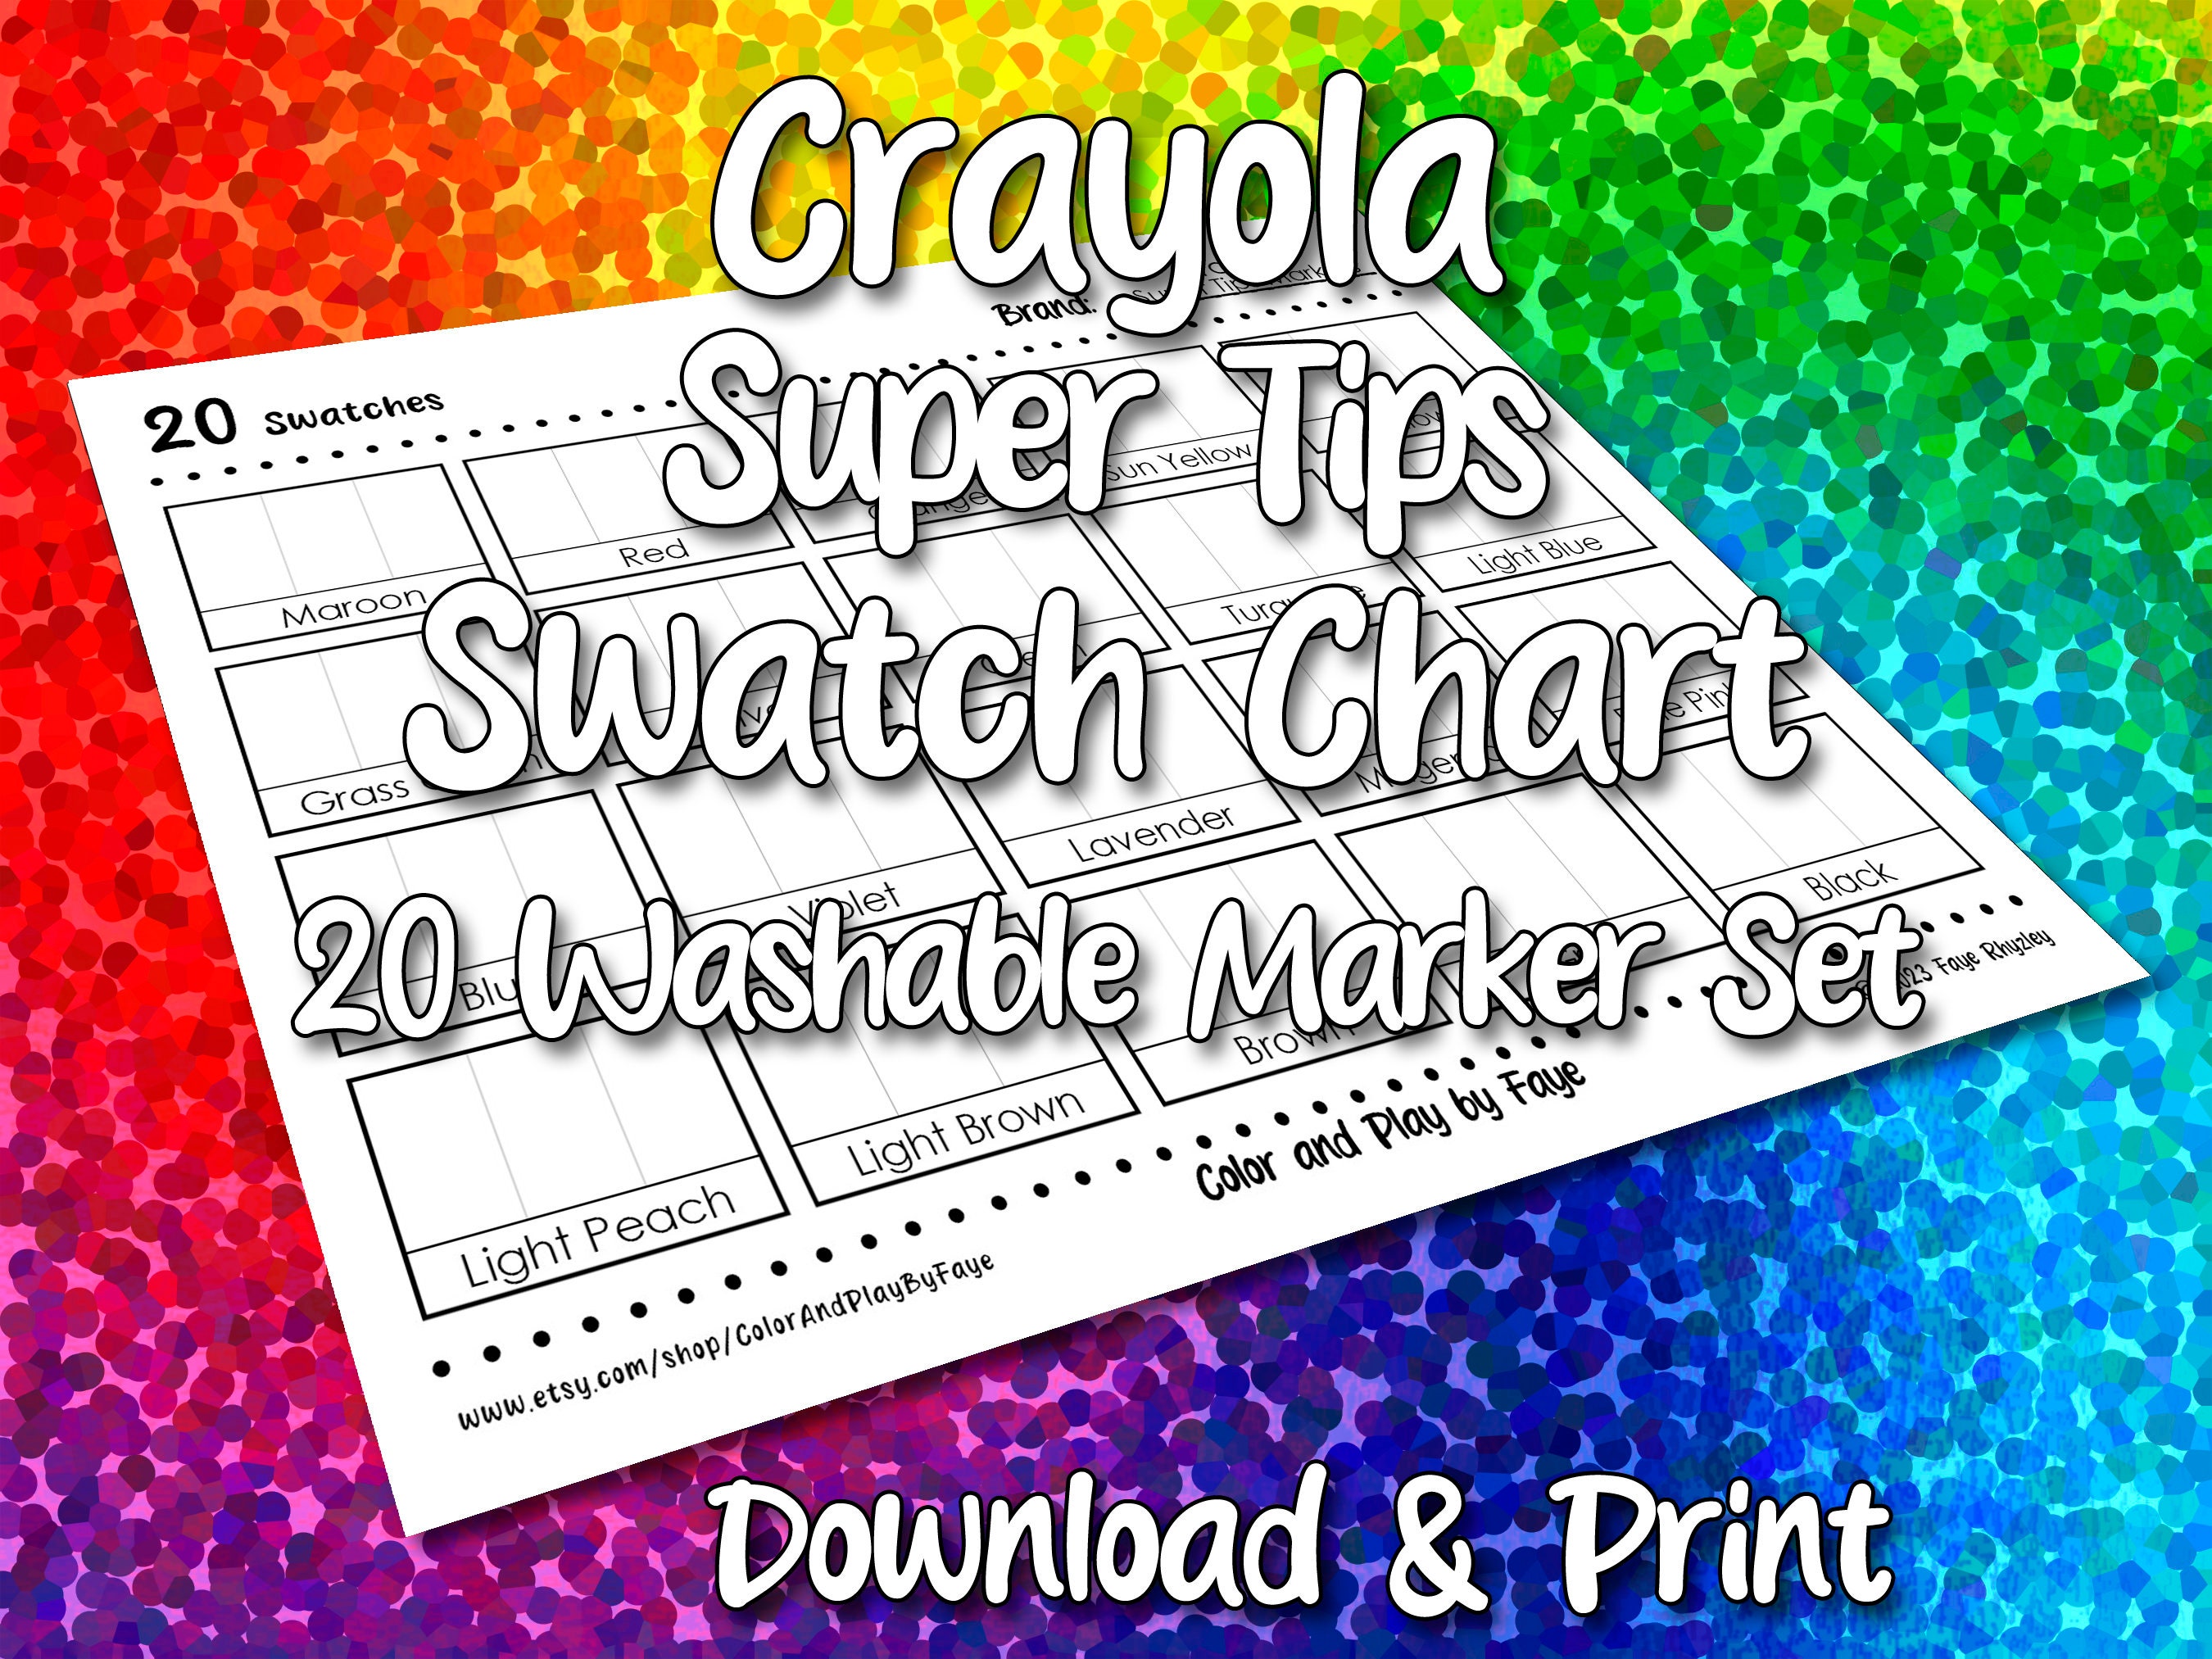 100 Super Tips Color Names! Swatch and Color Charts for Crayola